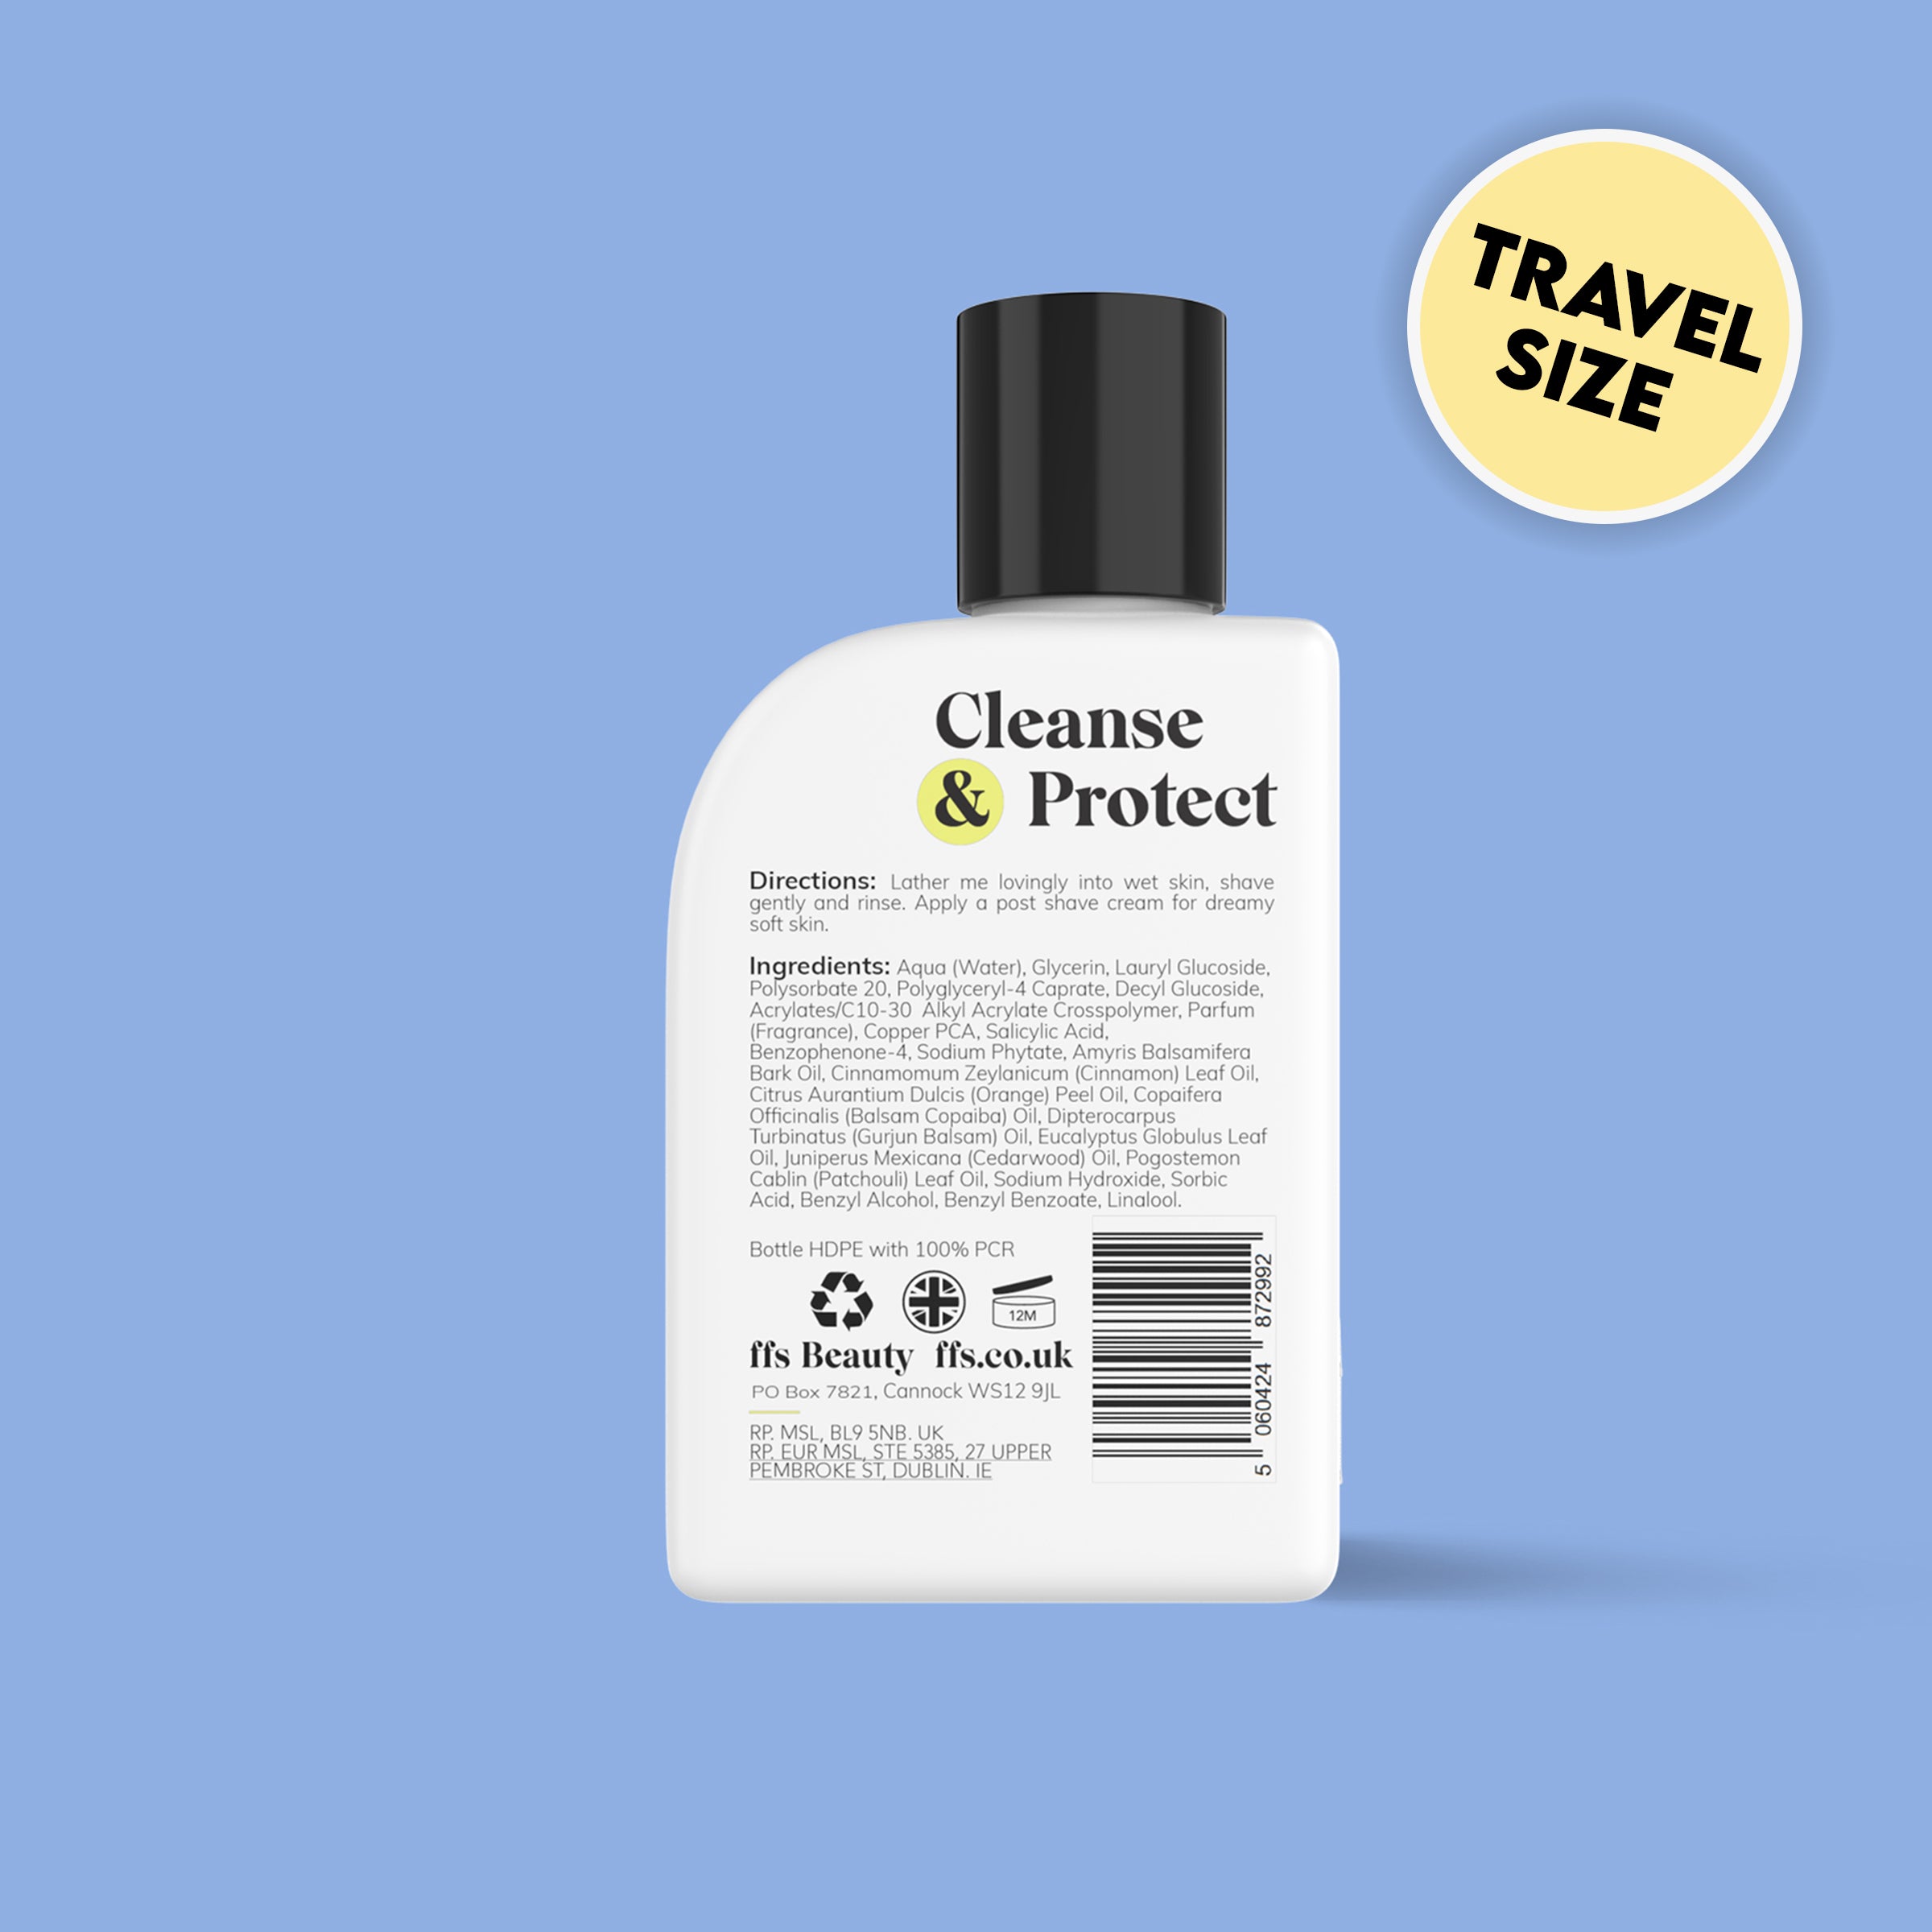 Cleanse & Protect: Shave Gel - Travel Size